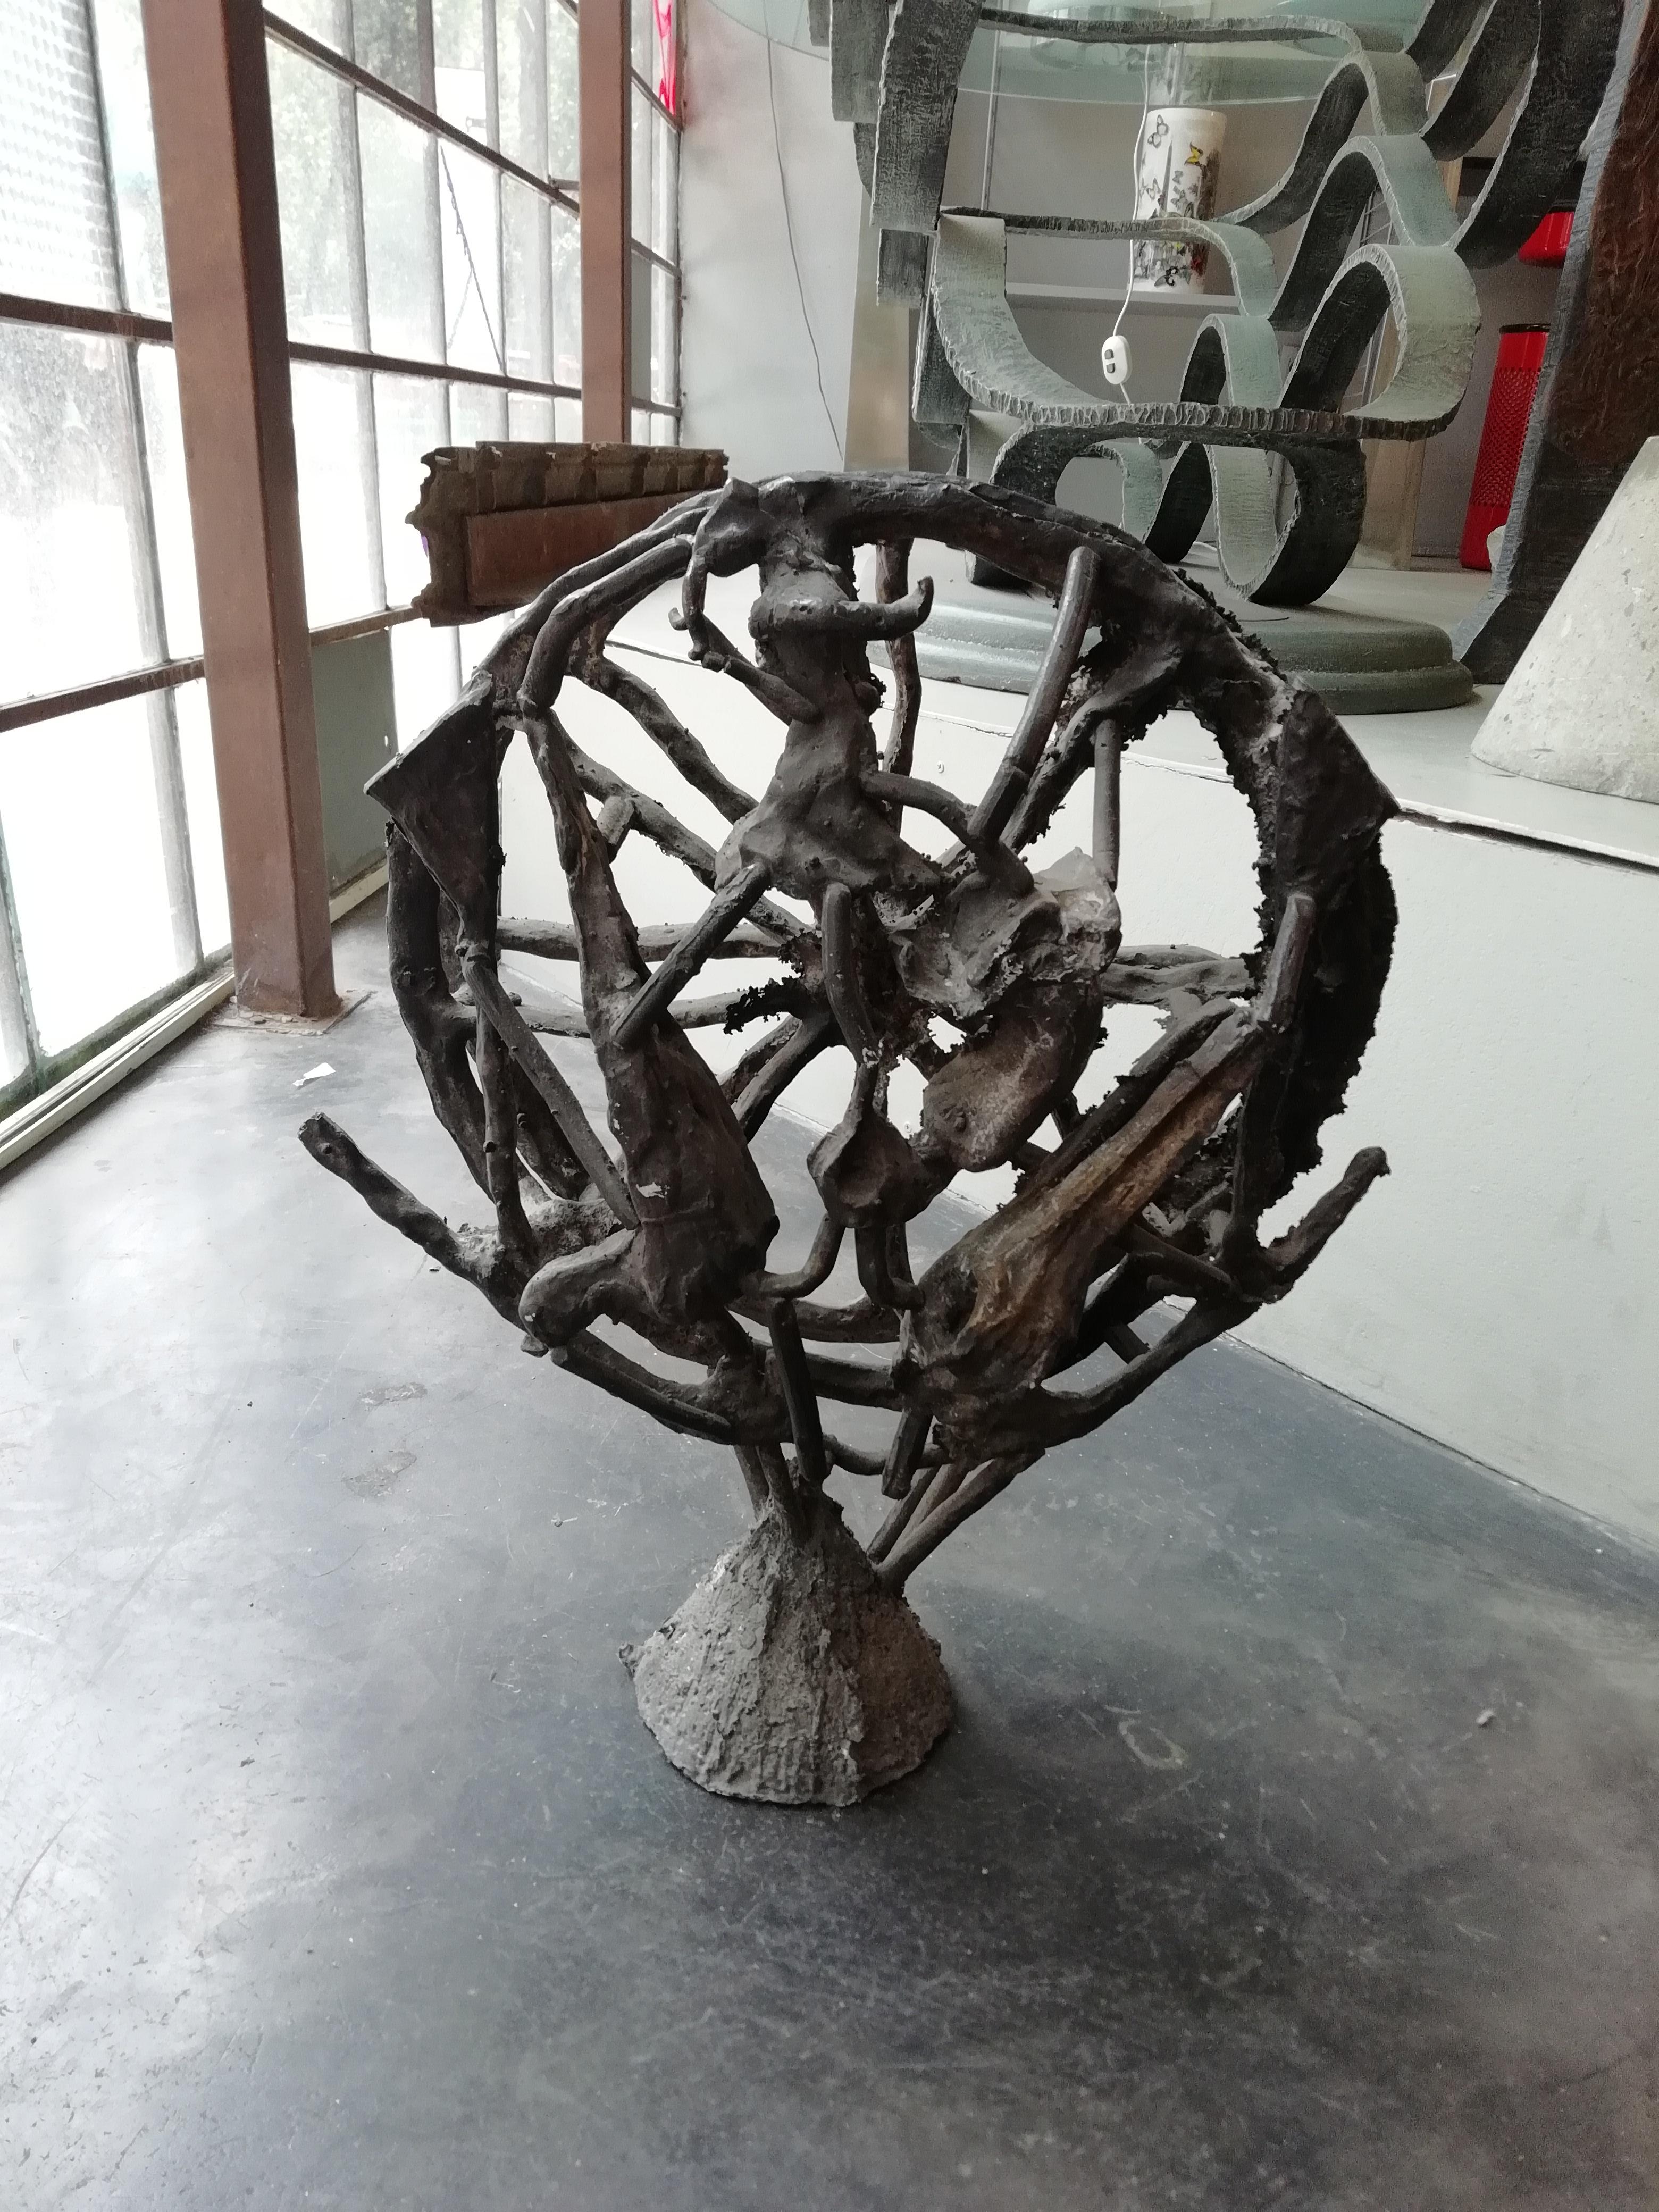 Interesting bronze sculpture by Oaxaca-born Mexican artist Guillermo Olguín Mitchell. The sculpture is not signed.

Born in Mexico City and raised in the state of Oaxaca, New York-based artist and mezcal entrepreneur Guillermo Olguín has become an